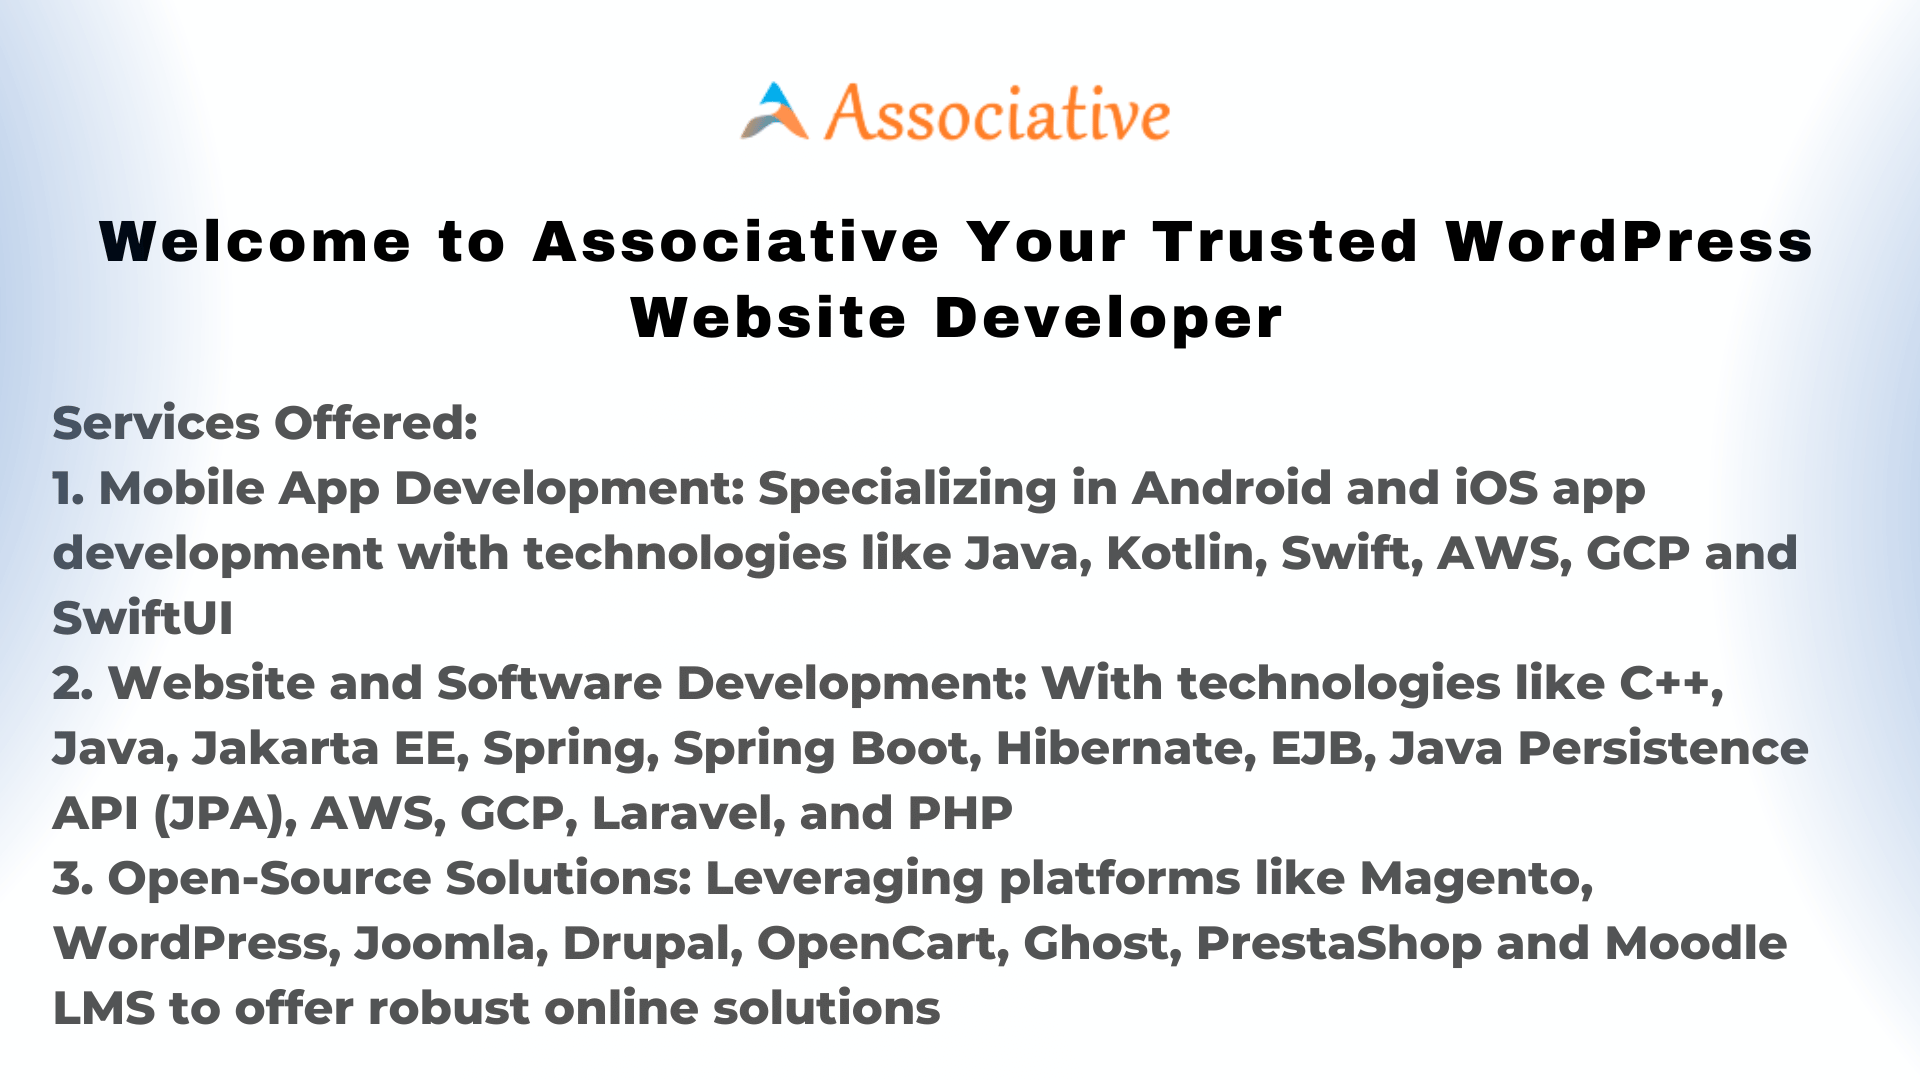 Welcome to Associative Your Trusted WordPress Website Developer